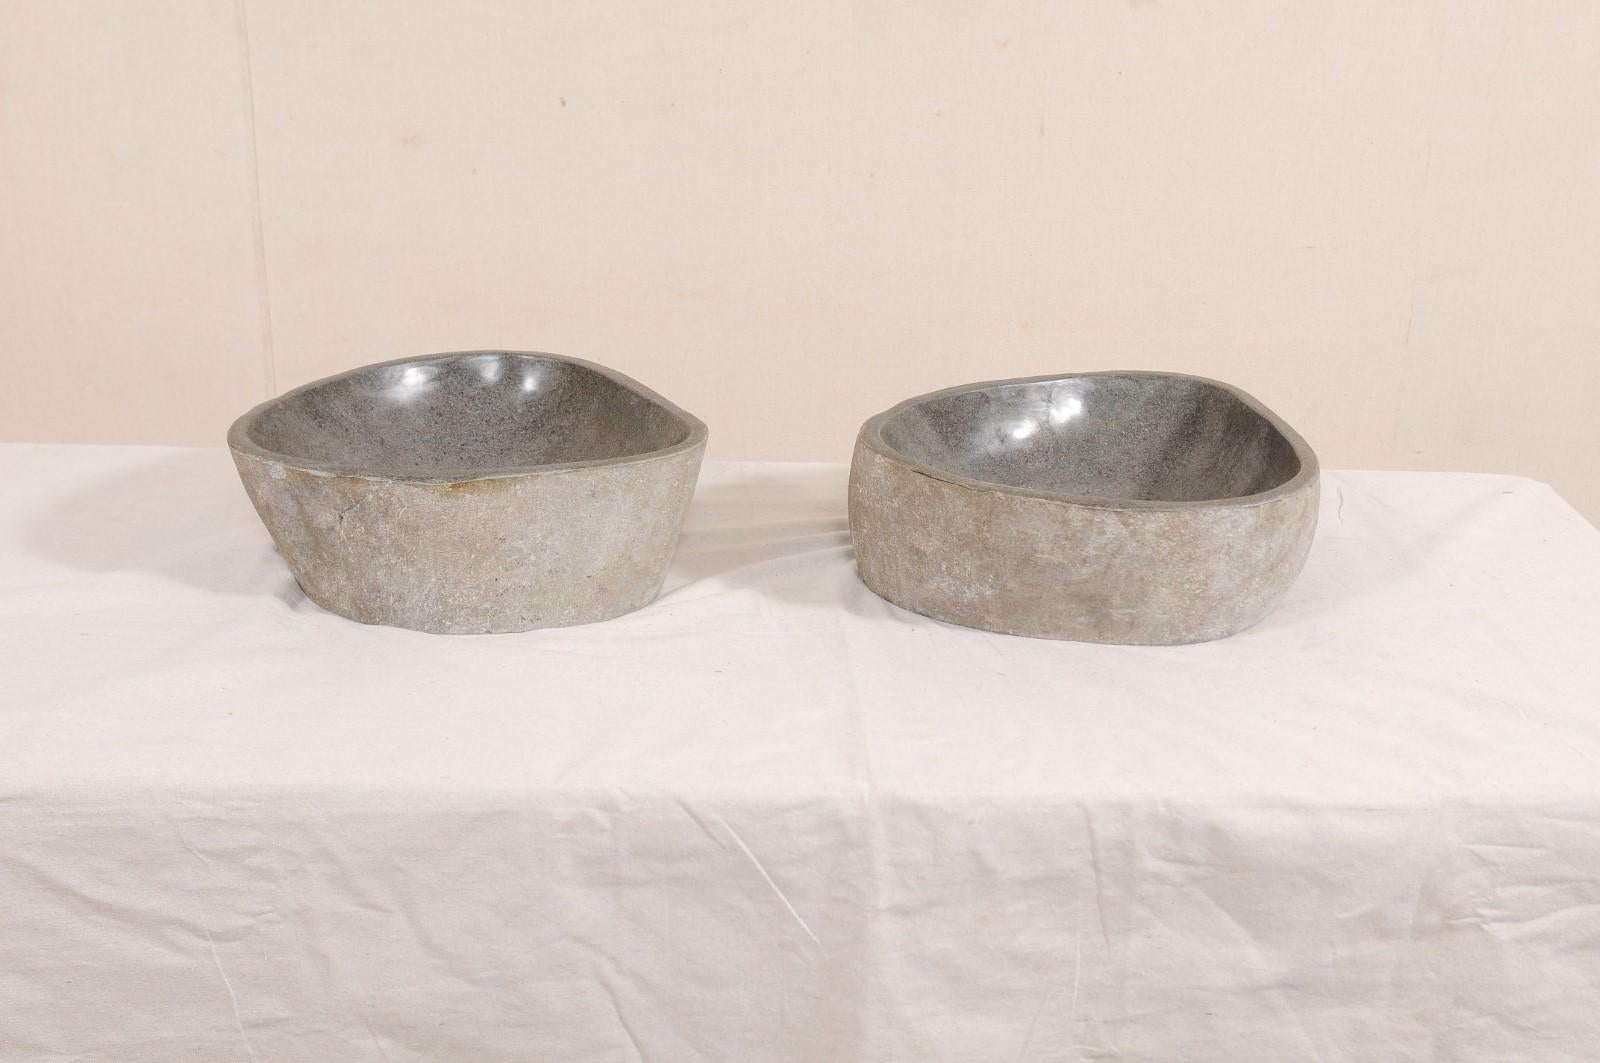 A pair of river rock wash basins. This pair of sinks have each been carved from a single, natural river rock boulder. Each sink has a polished bowl with natural stone on the exterior. Beautifully organic designs courtesy of Mother Nature, no two